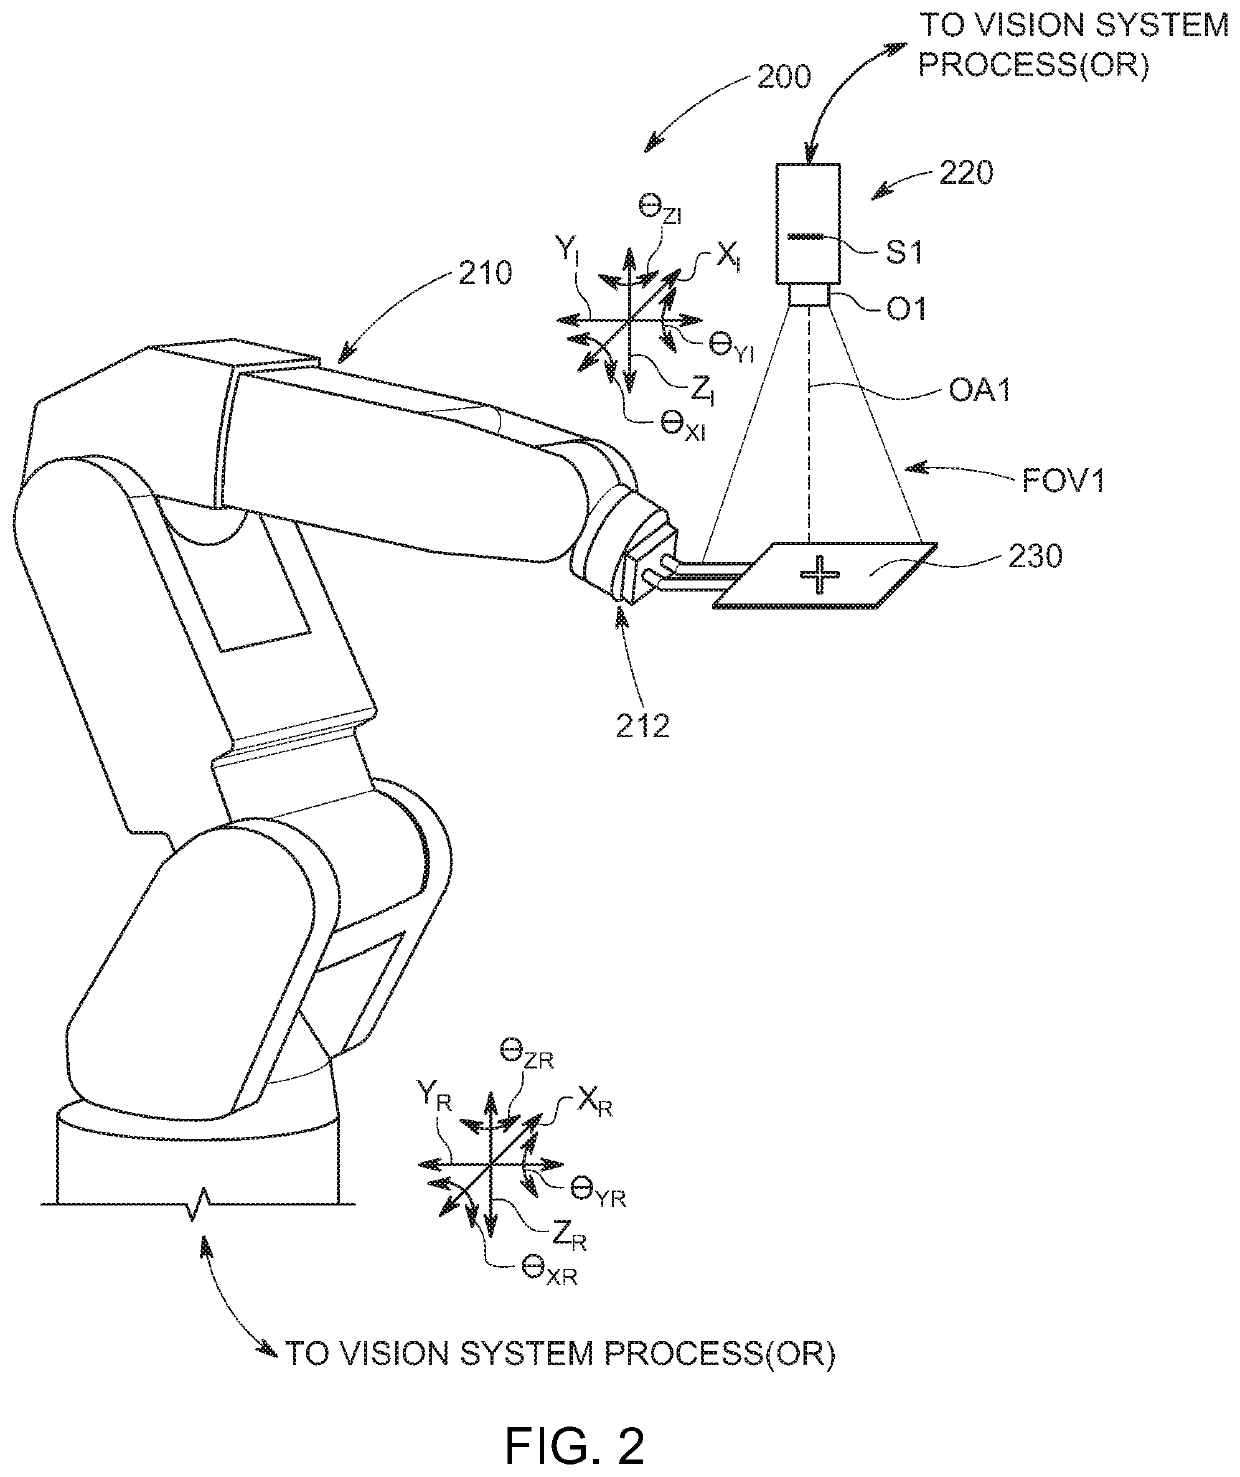 System and method for automatic hand-eye calibration of vision system for robot motion